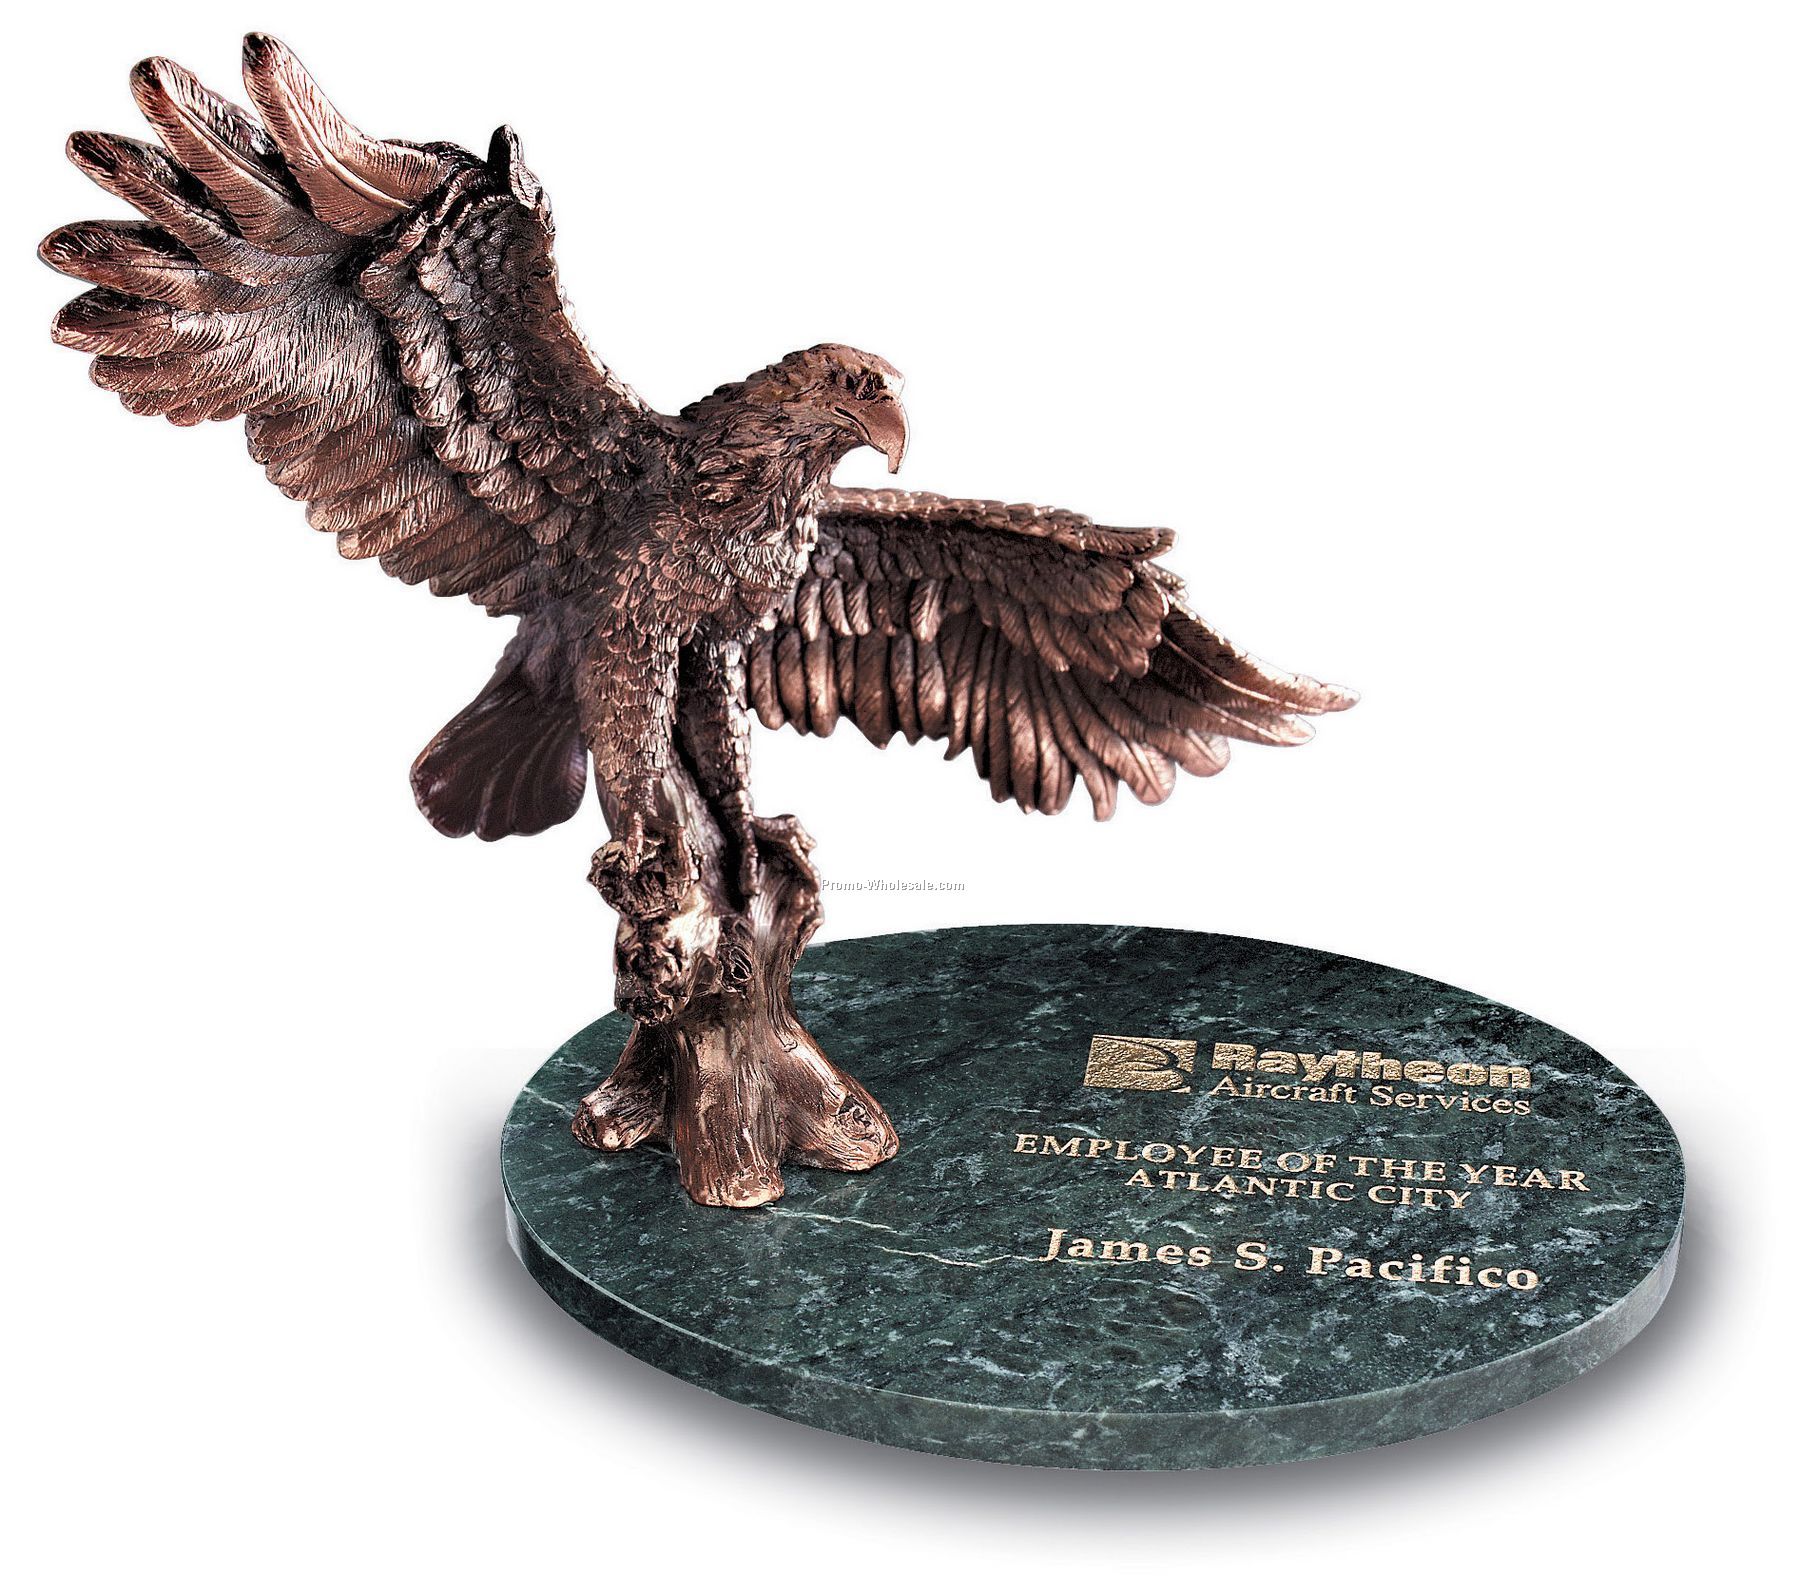 Small Victory Eagle Award W/ Green Marble Oval Base